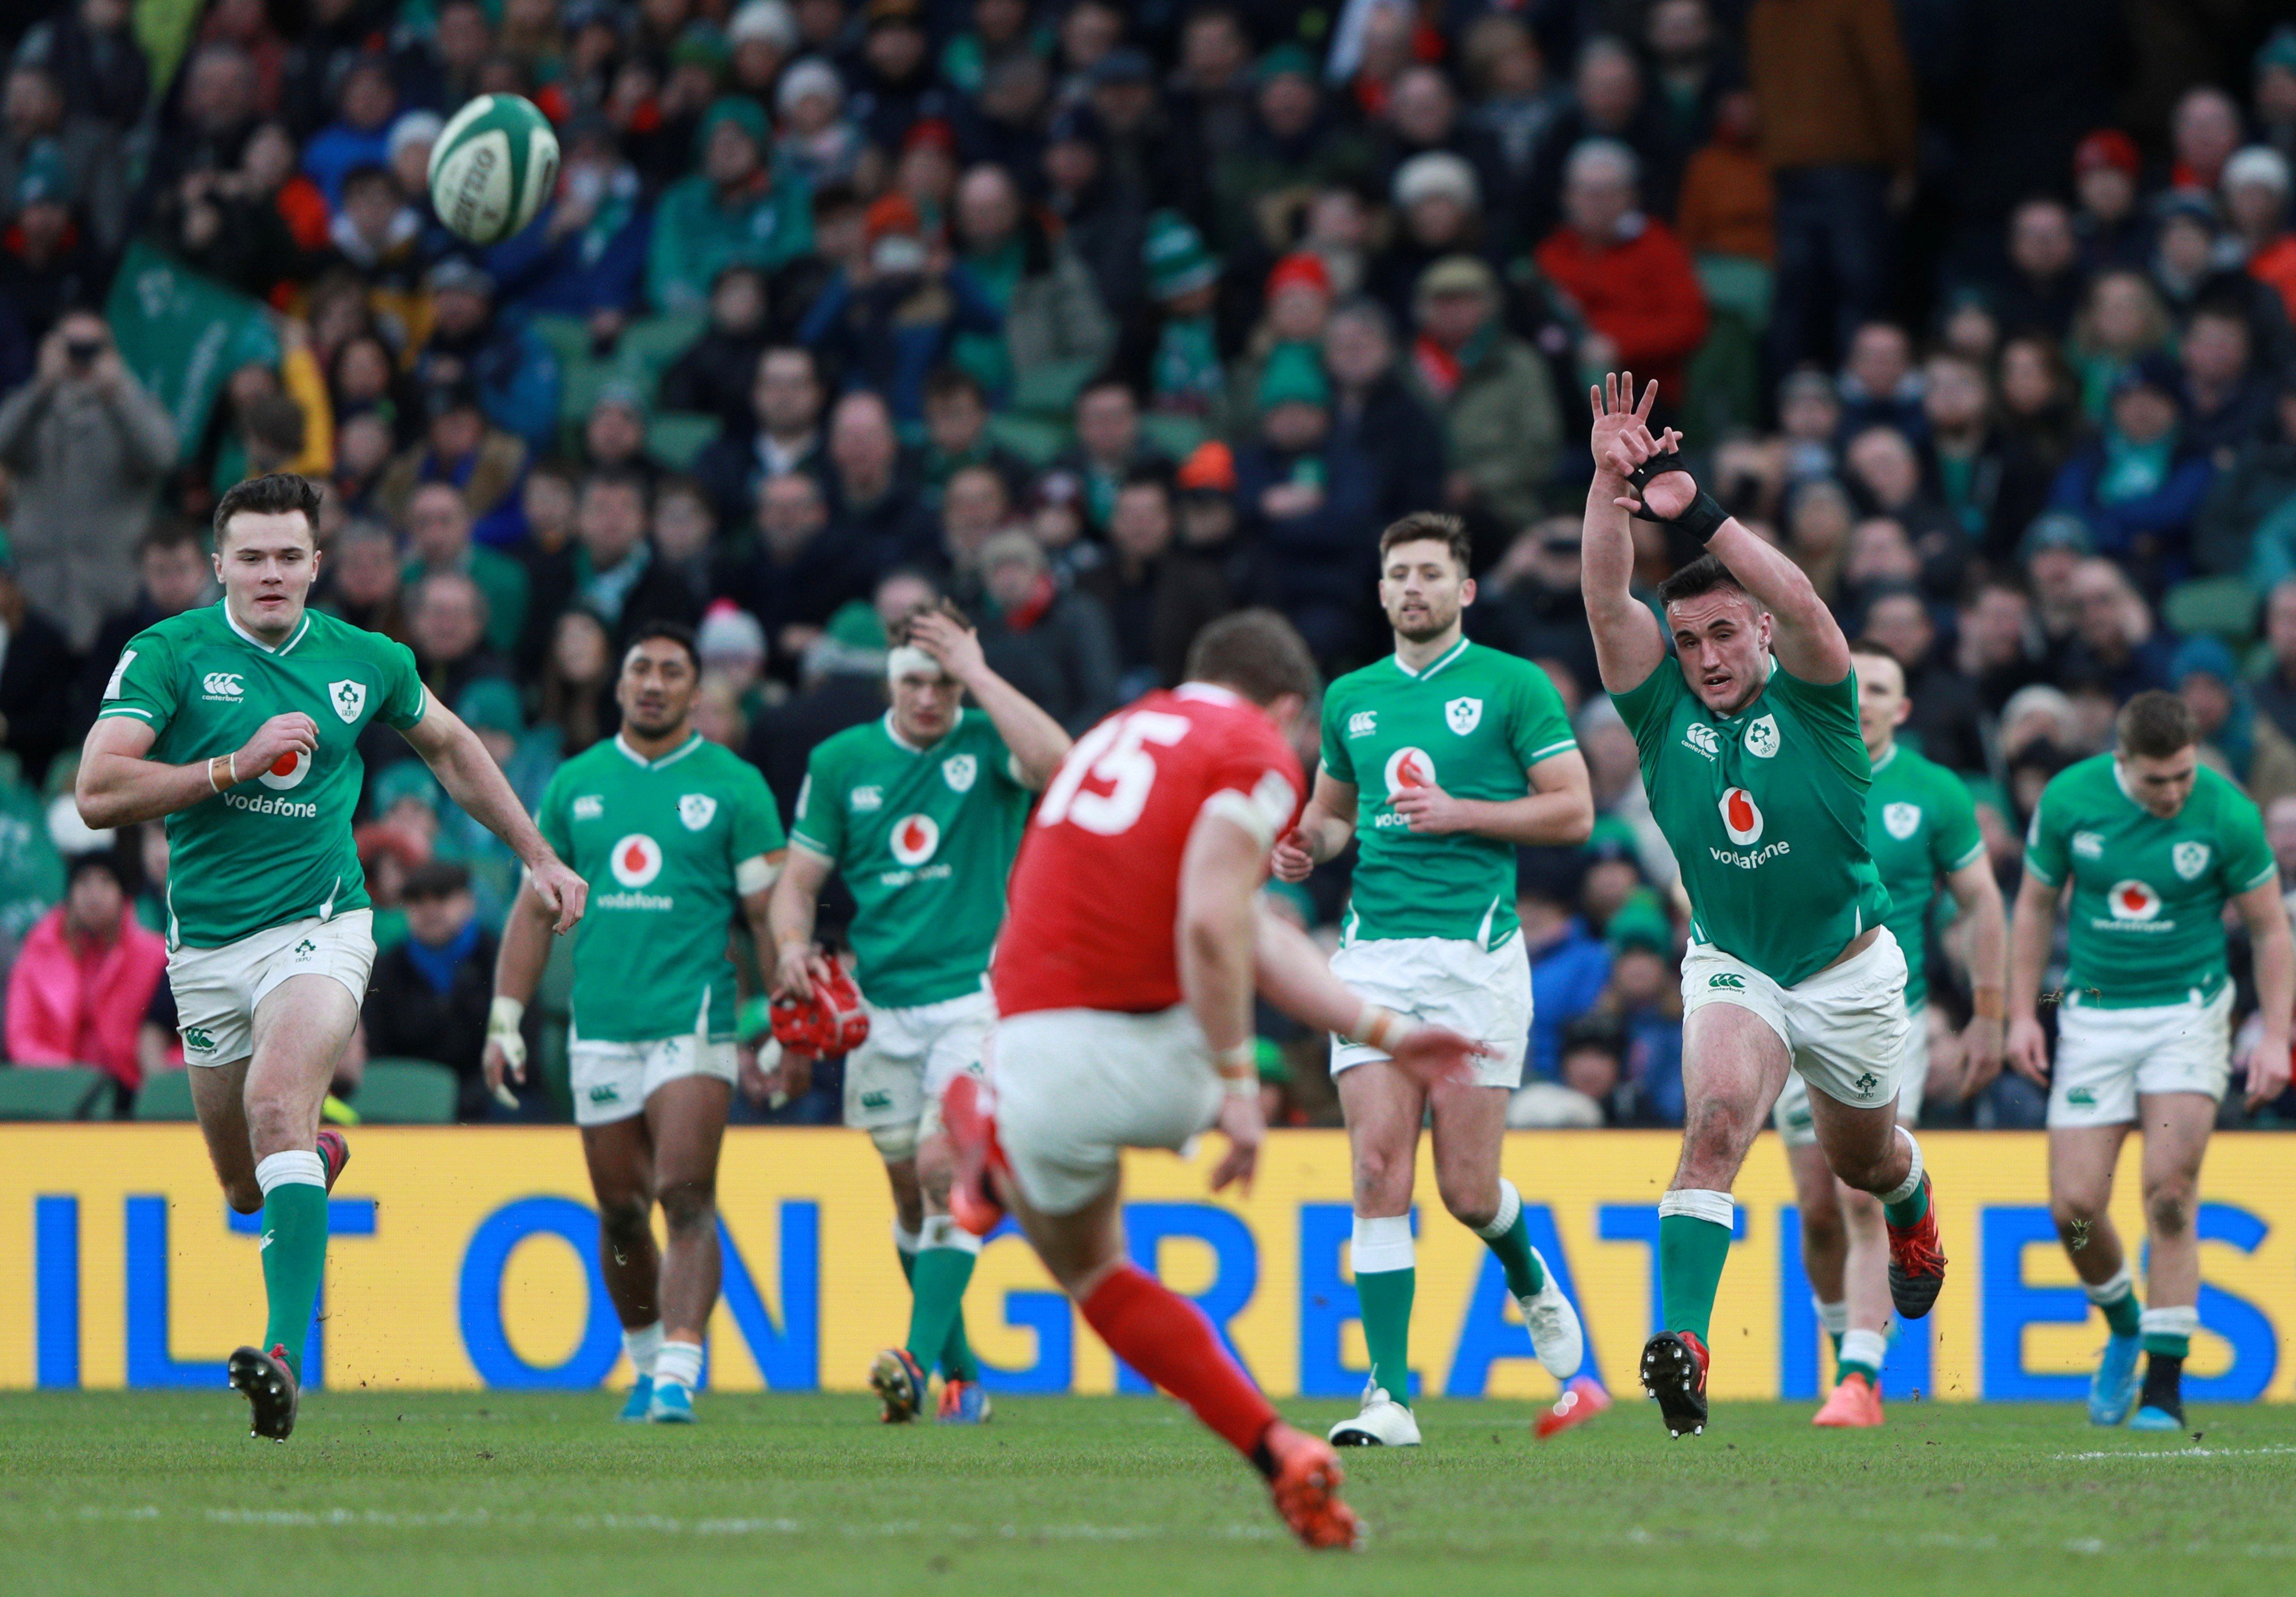 Ireland overcame Wales at the Six Nations Championship in Dublin on Saturday. Photo: Reuters